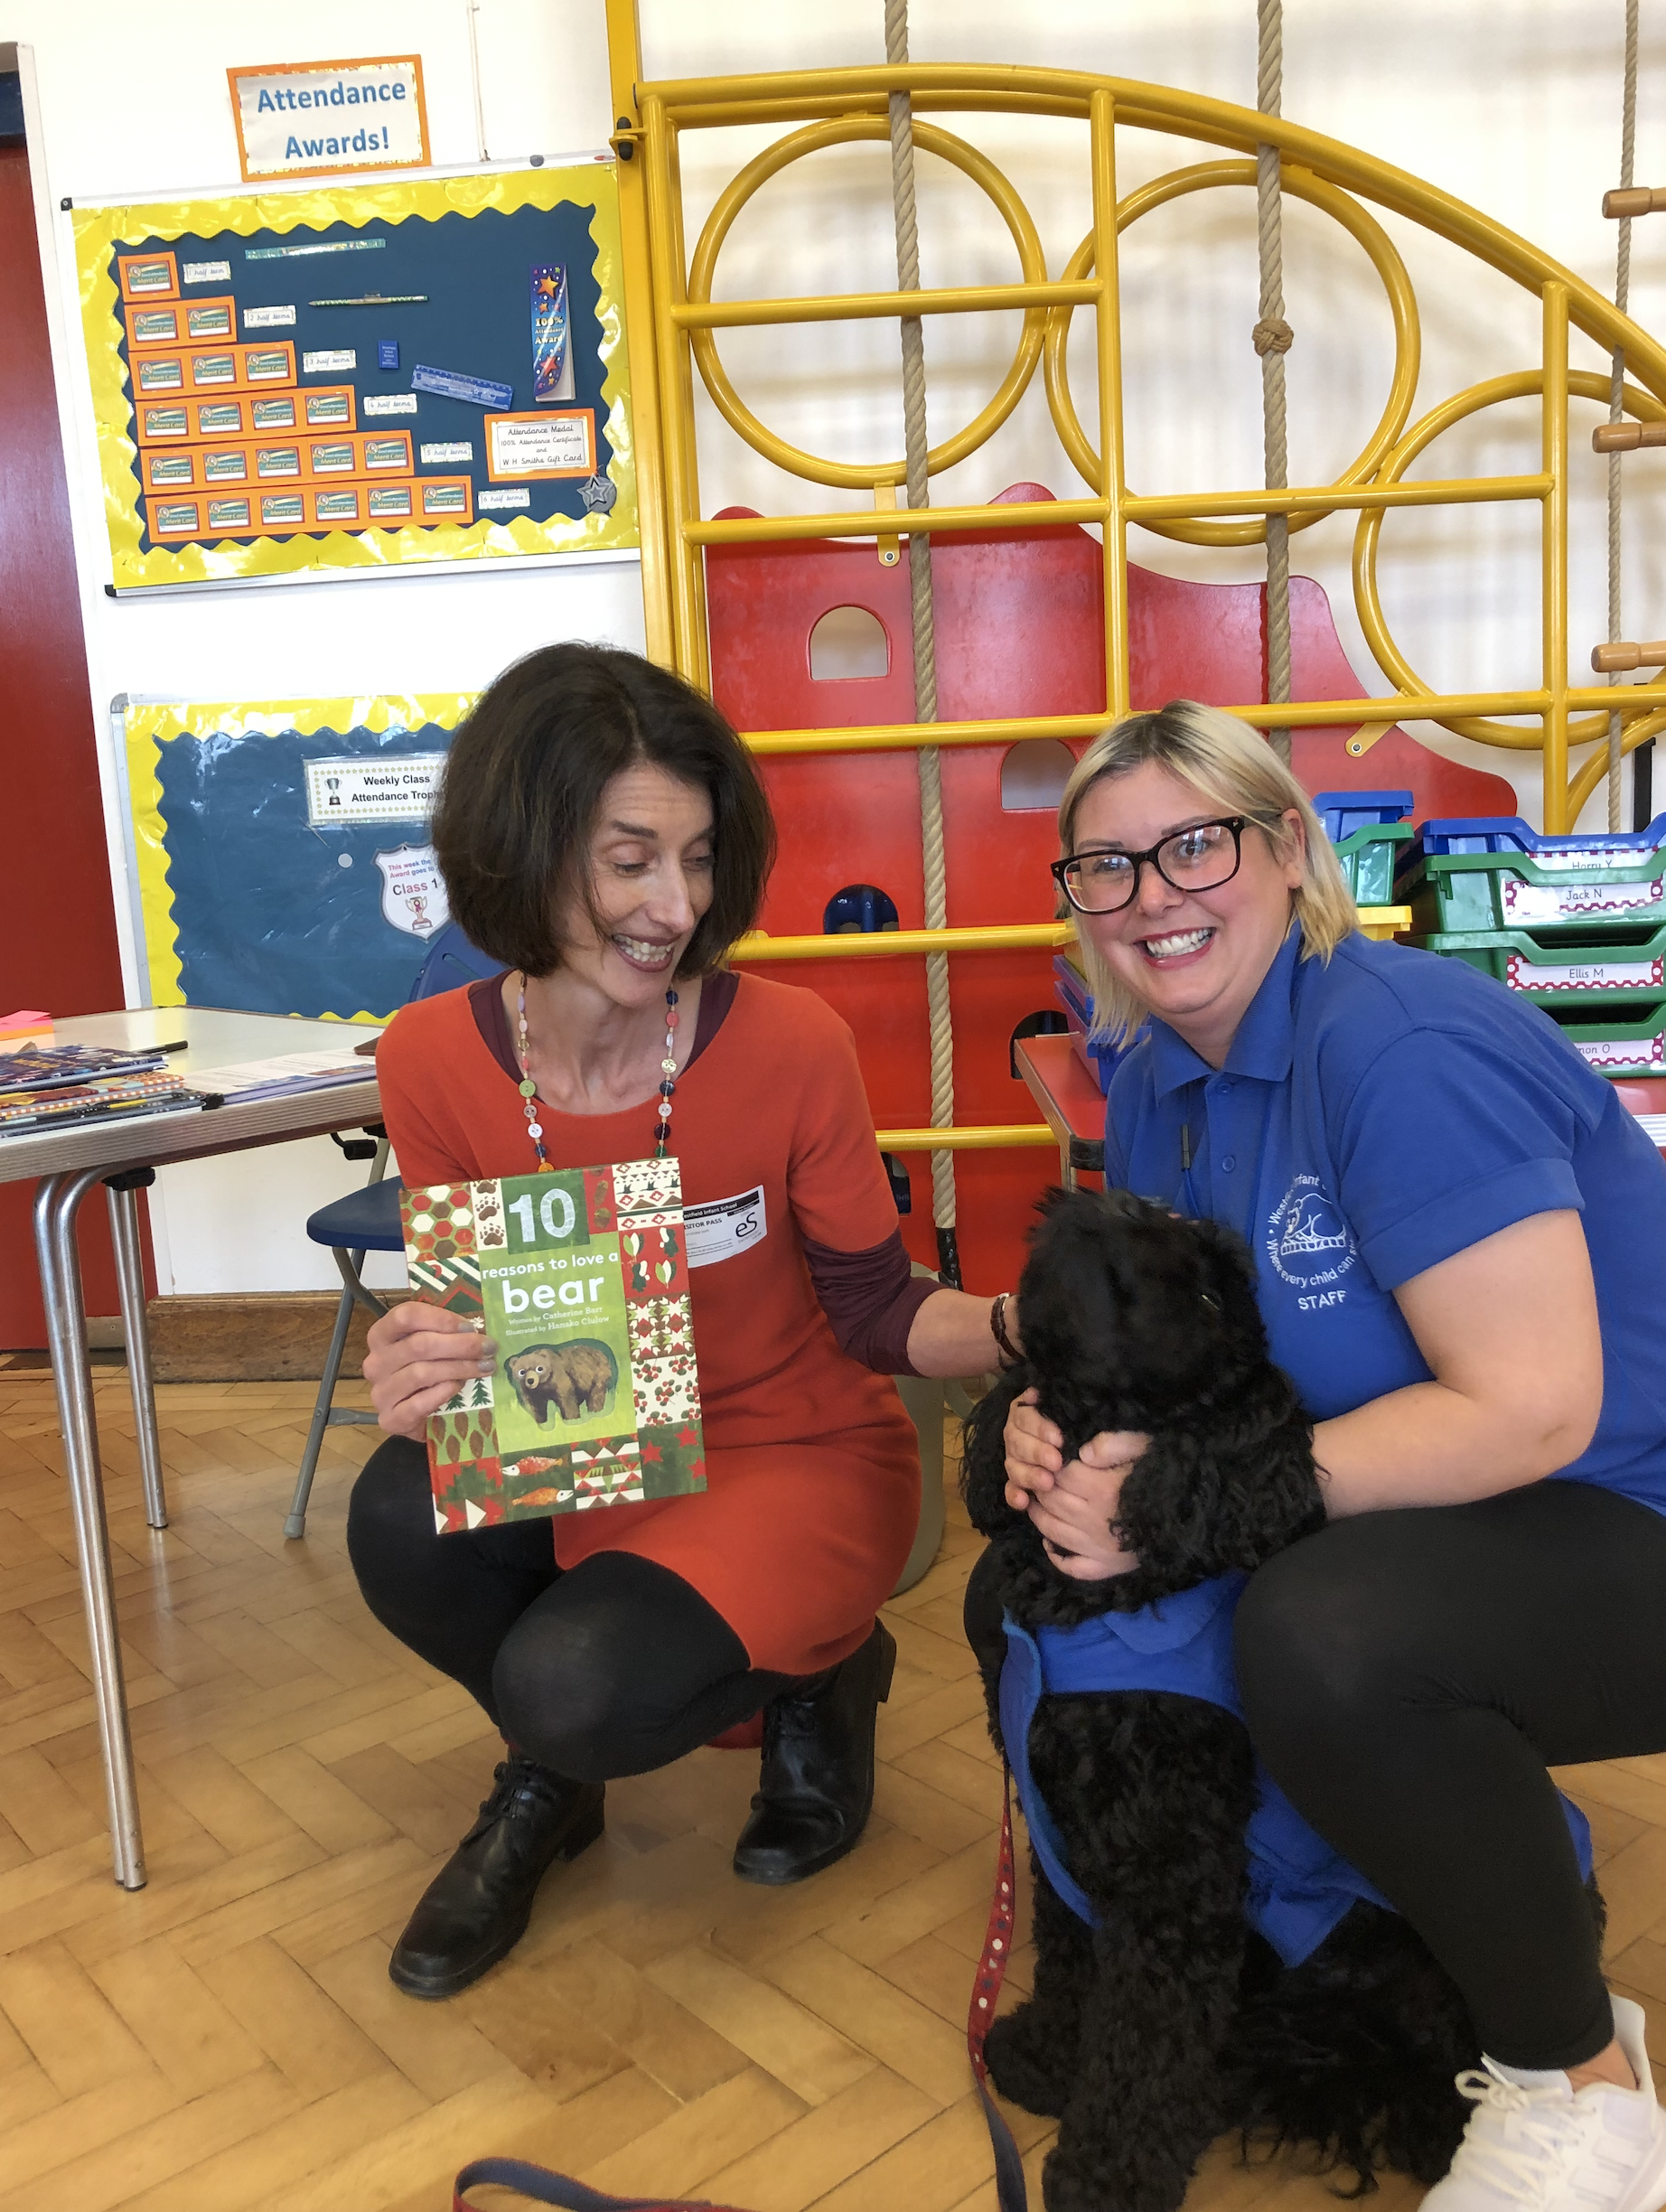 Meeting the school learning dog